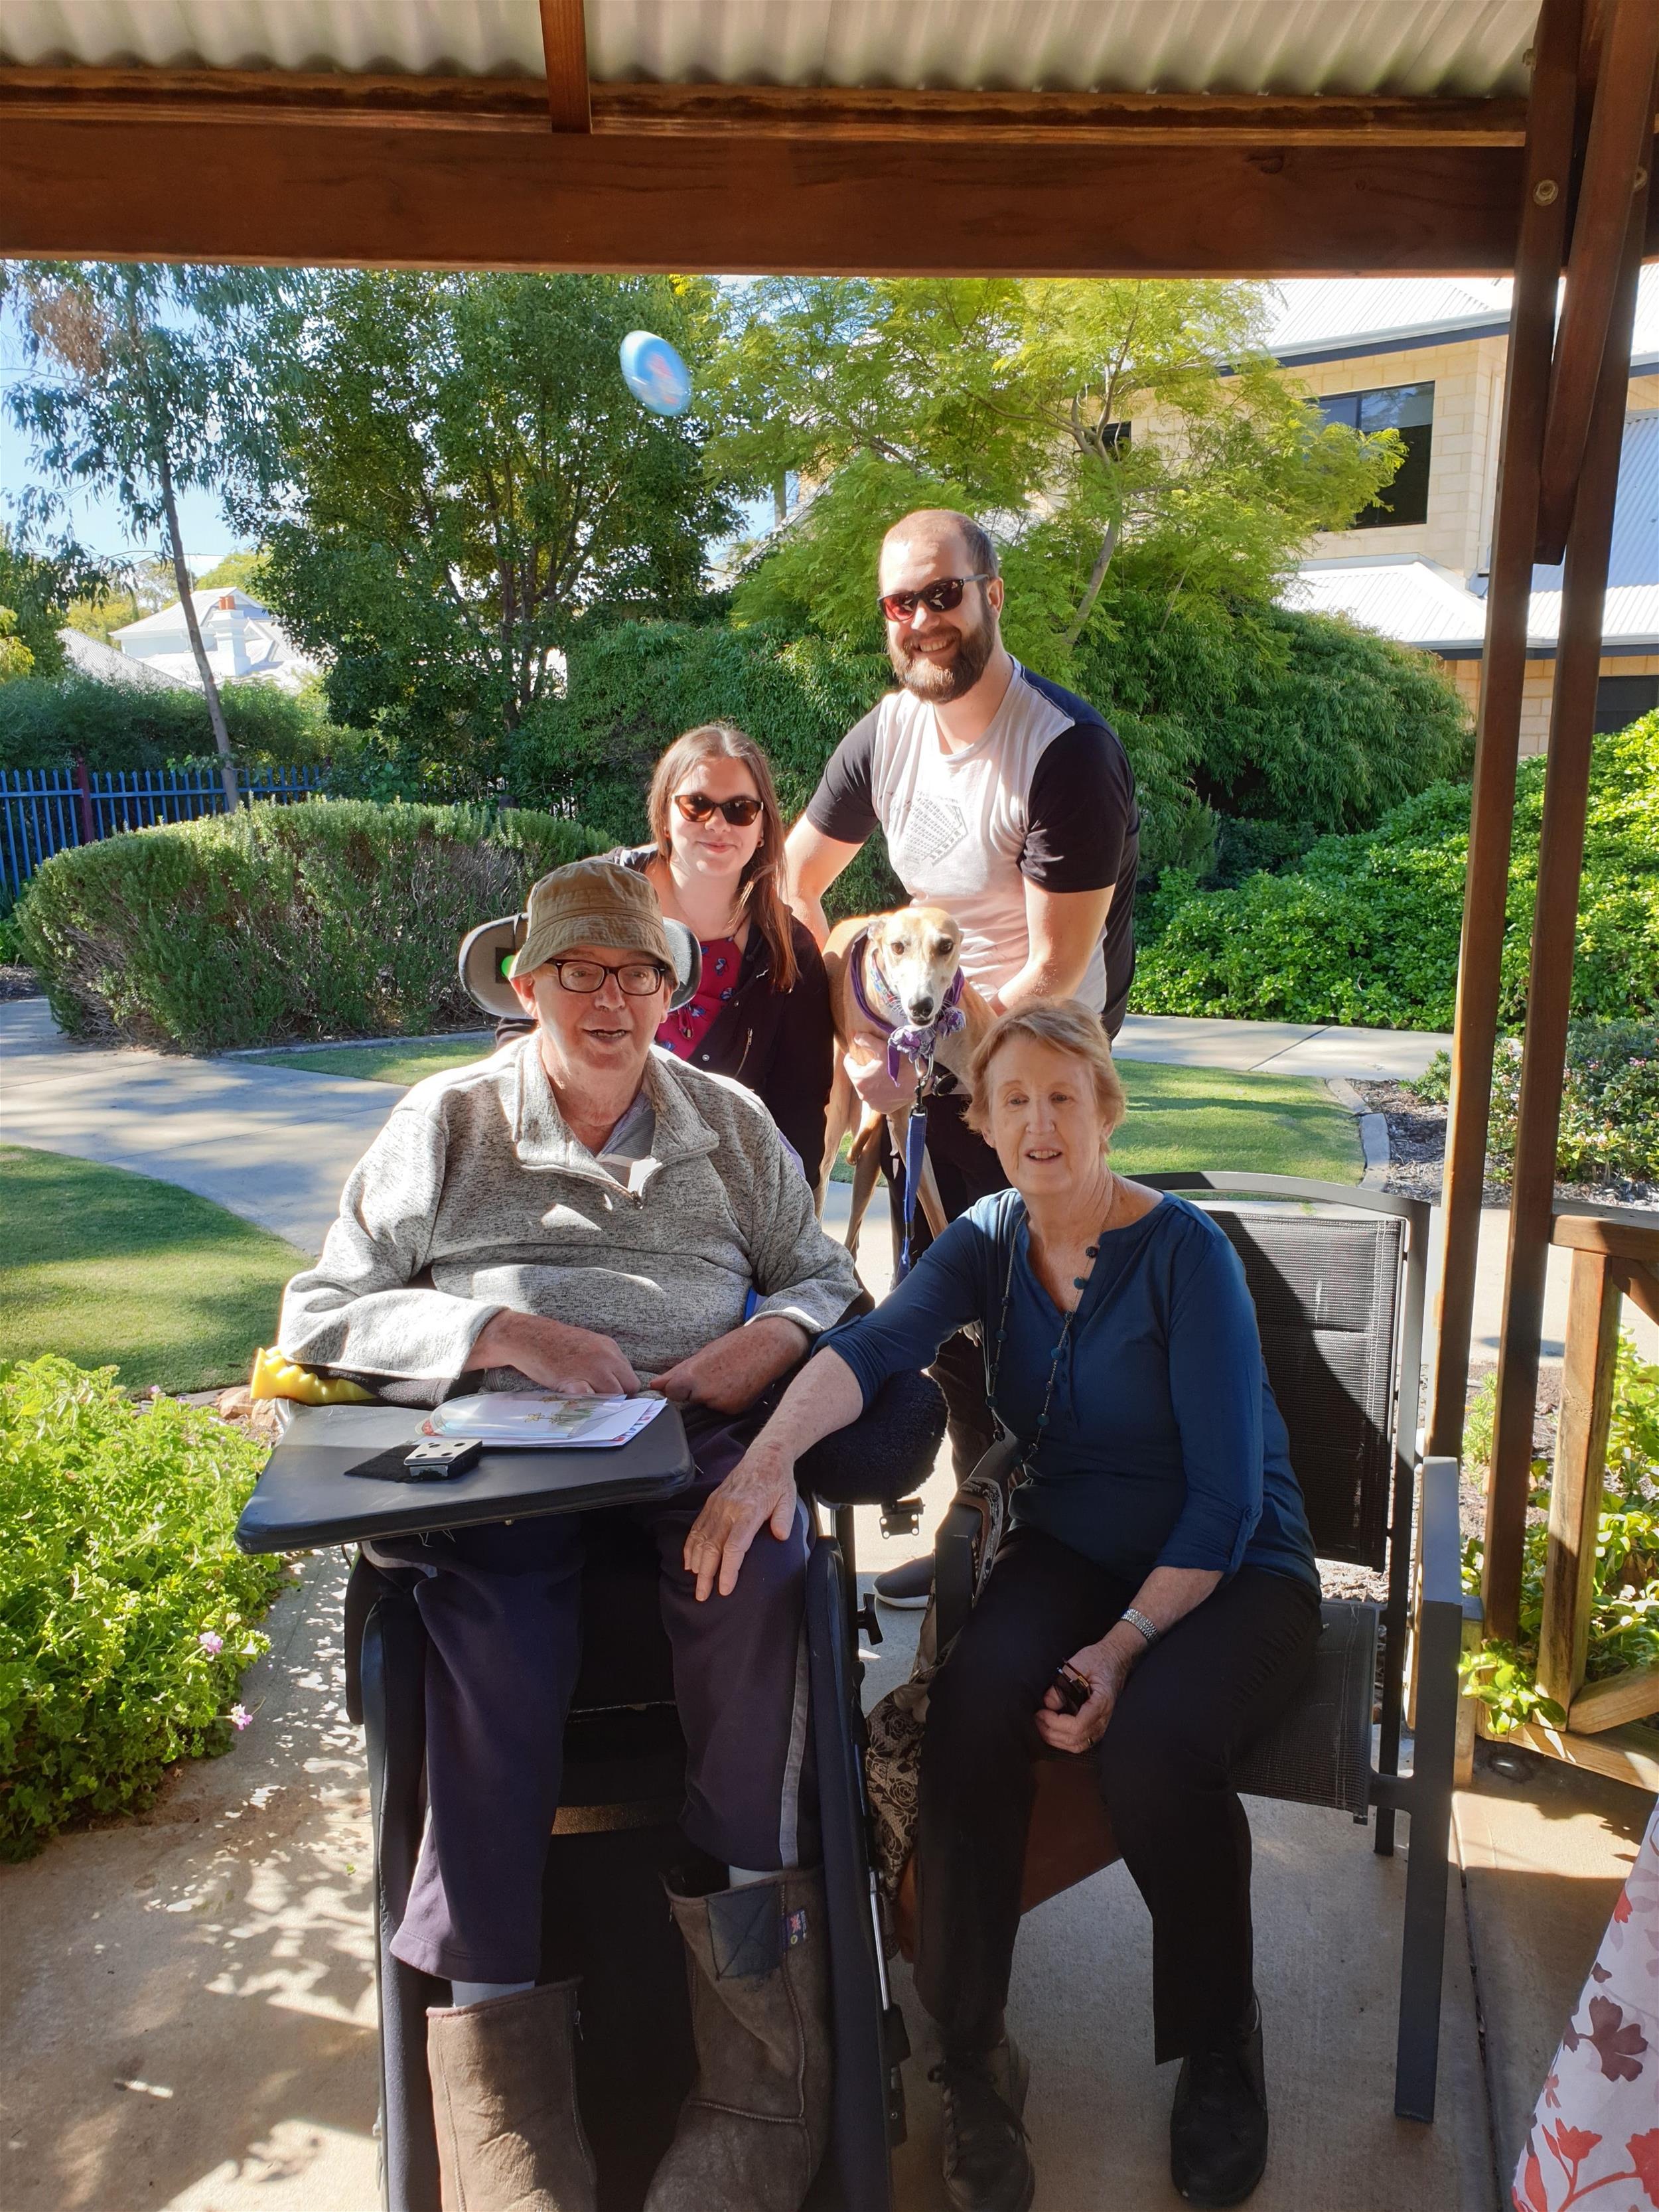 Family of four, 2 males (one in a wheelchair) and 2 females (one seated in a chair next to male in wheelchair) posing outside with their pet greyhound